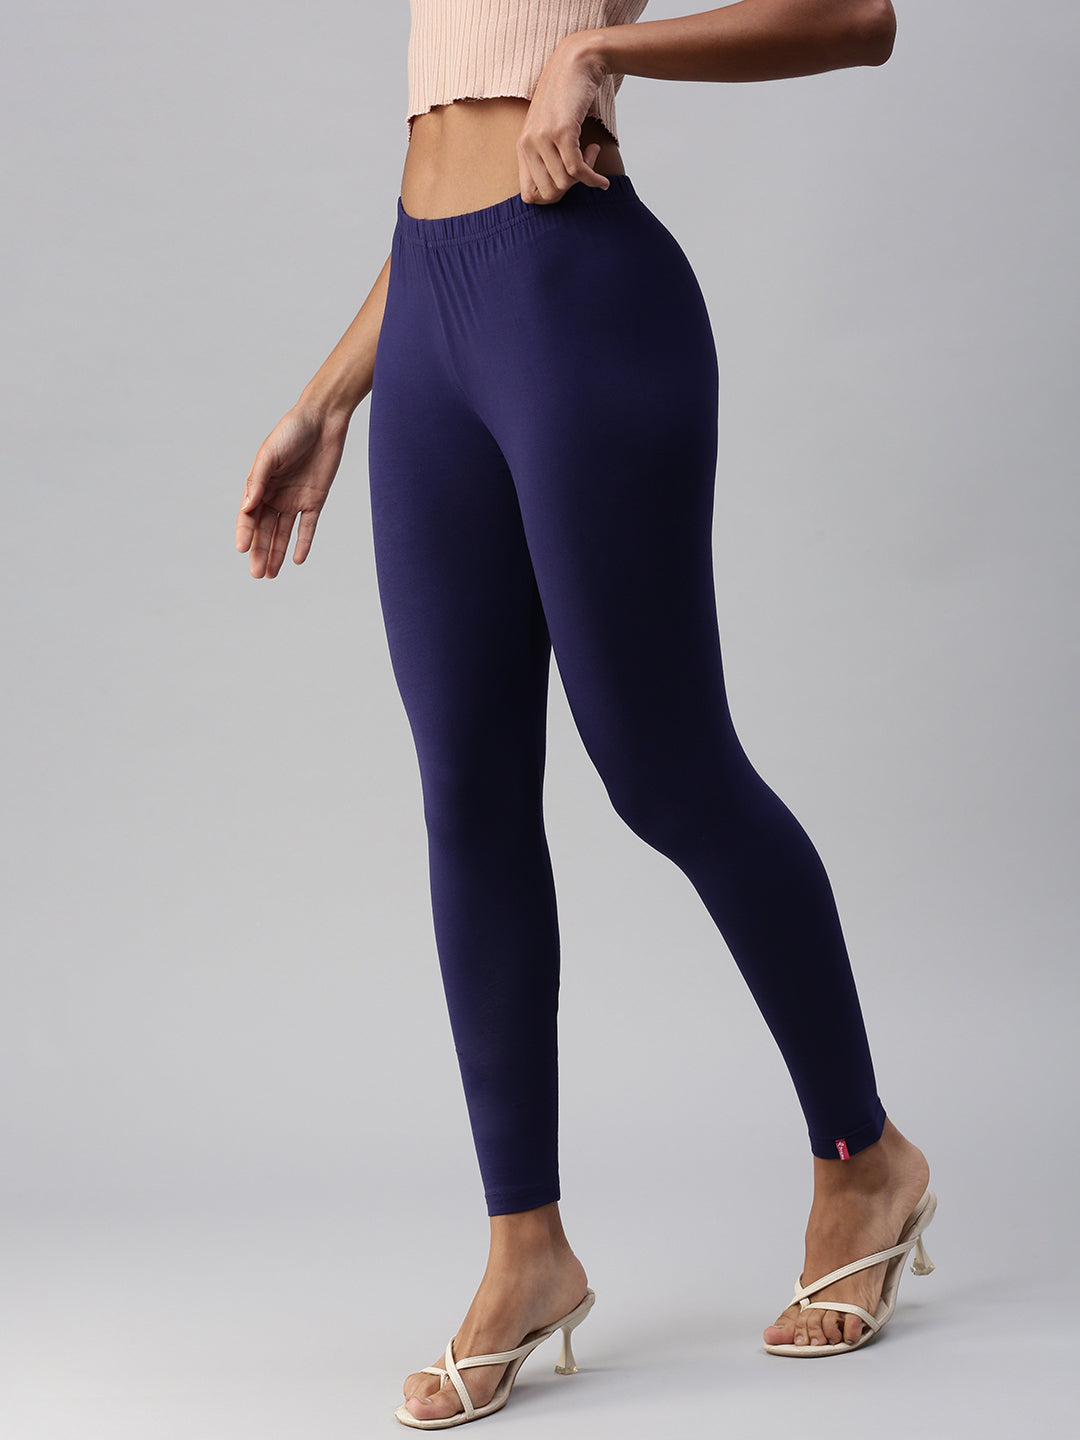 Prisma Ankle Leggings-S in Latur at best price by Rounaq Enterprises -  Justdial